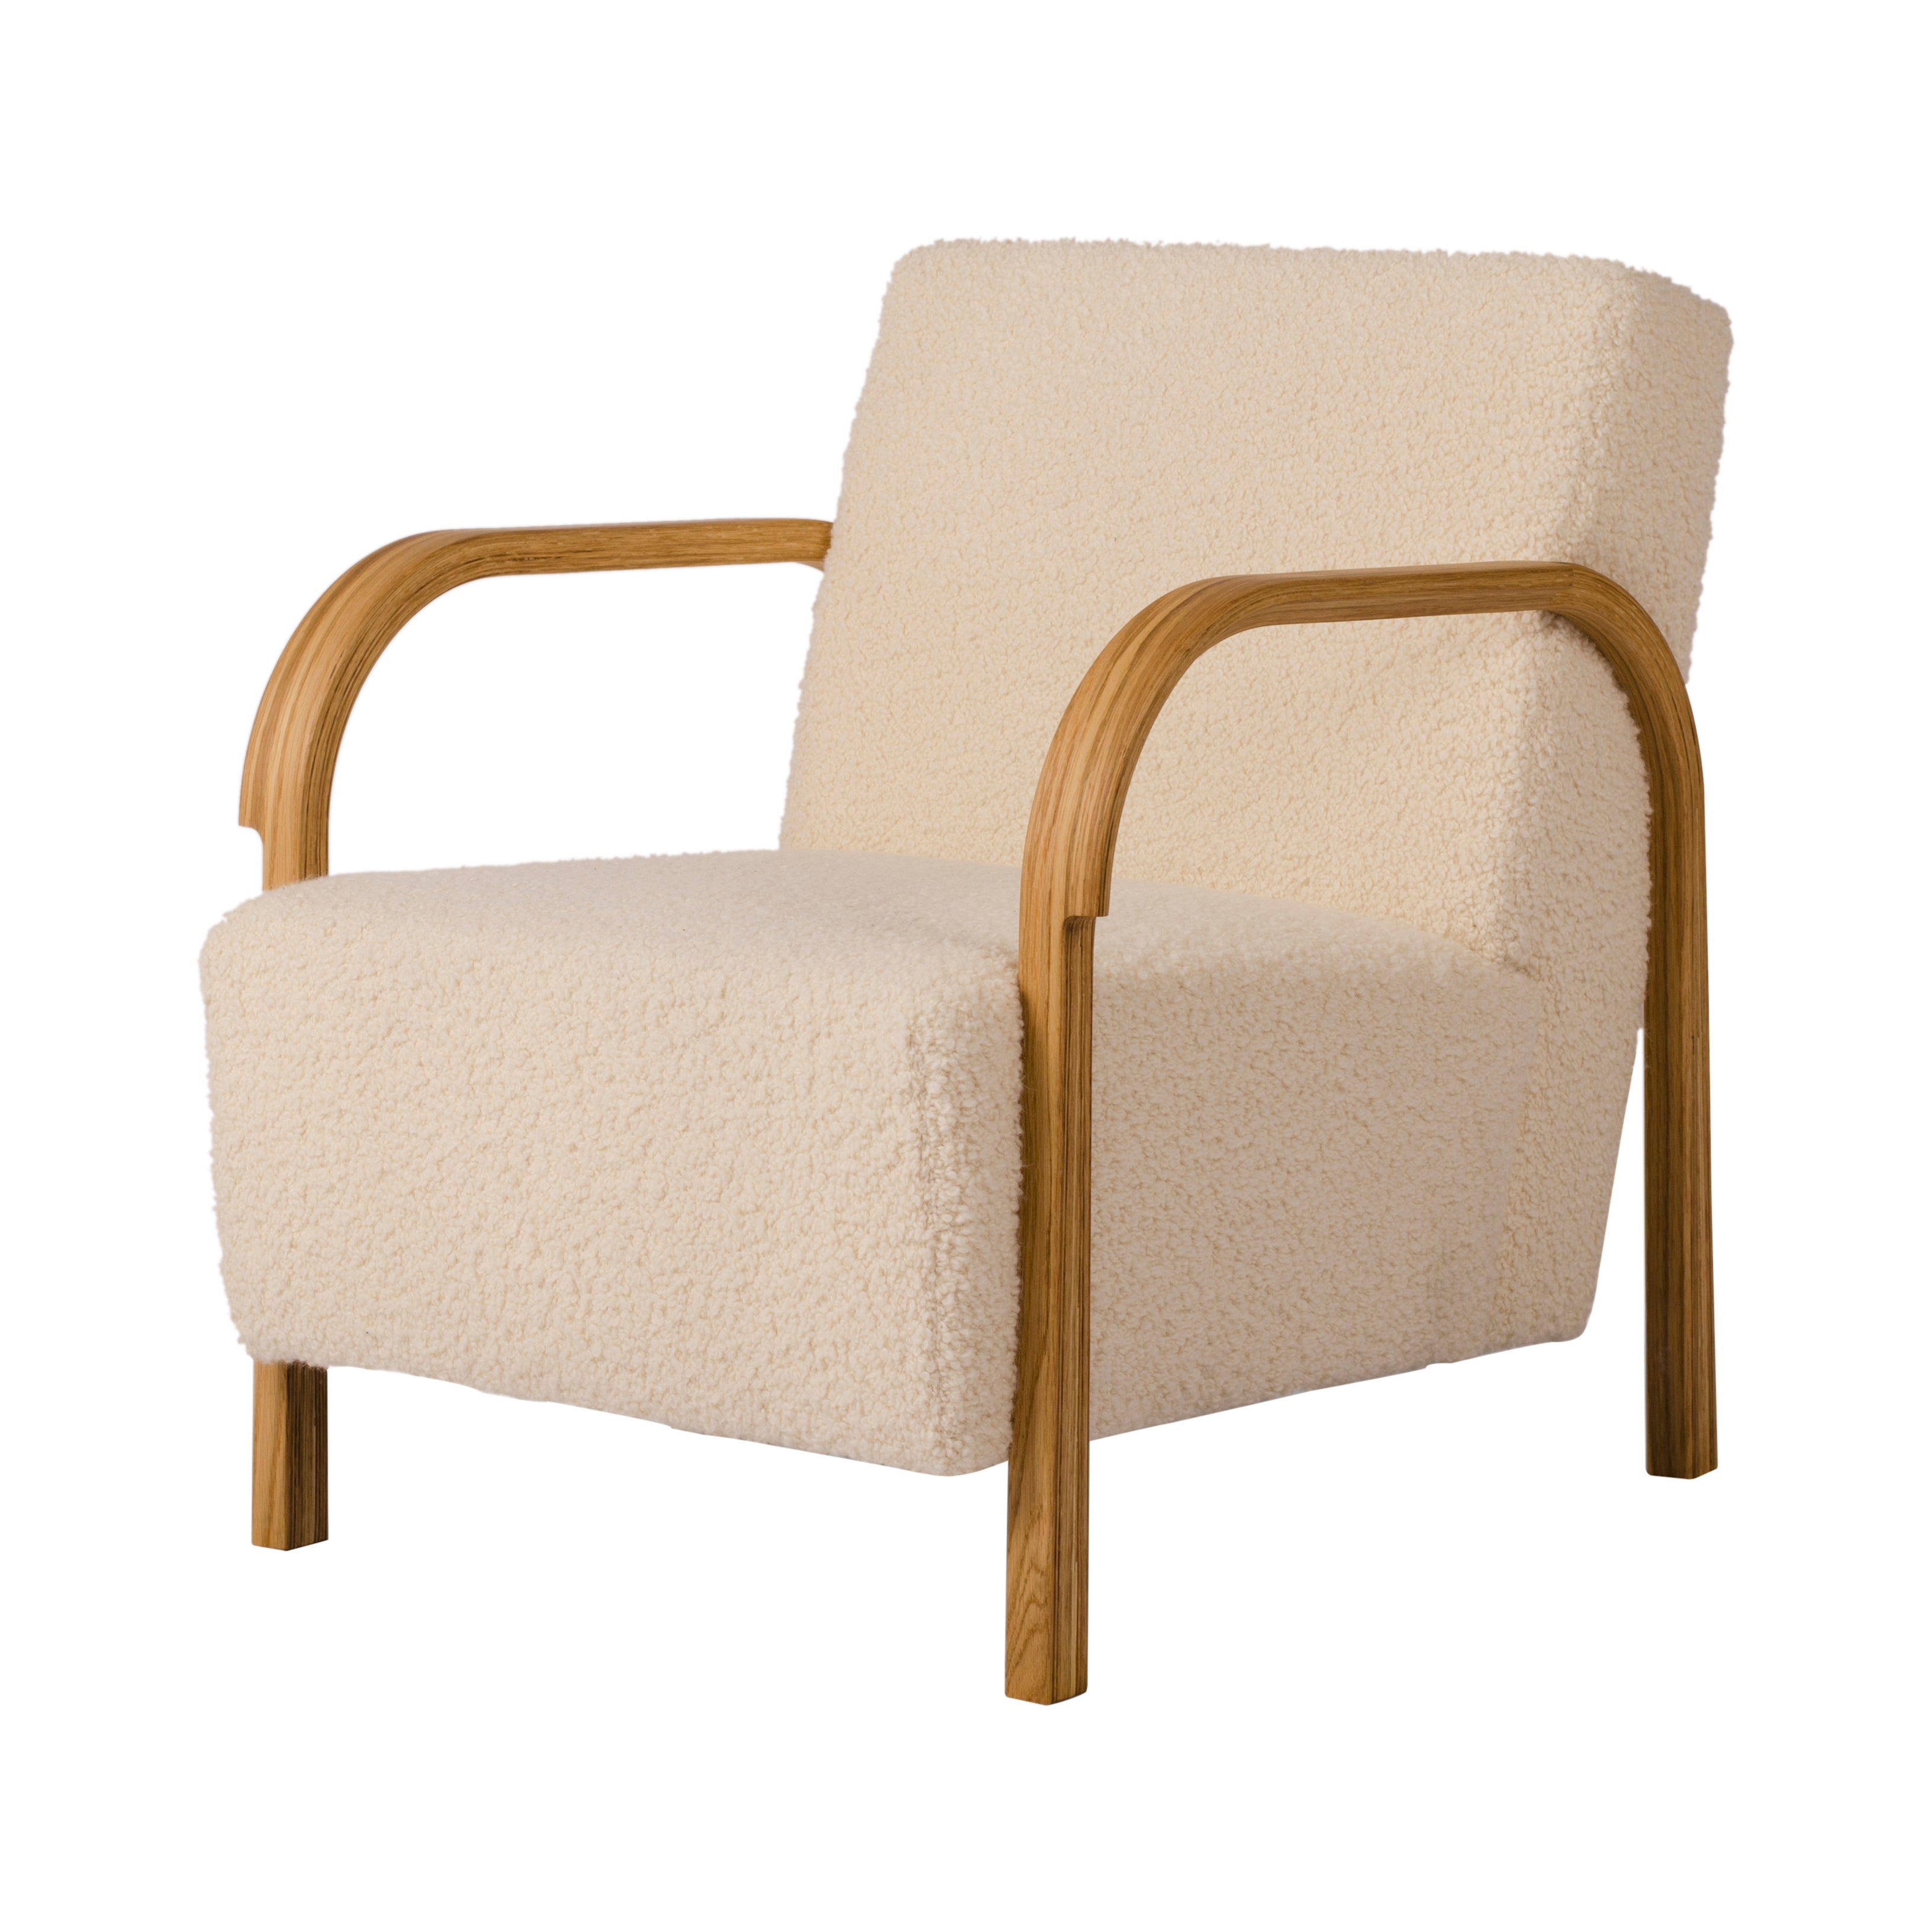 Arch Lounge Chair: Upholstered + Natural Oiled Oak